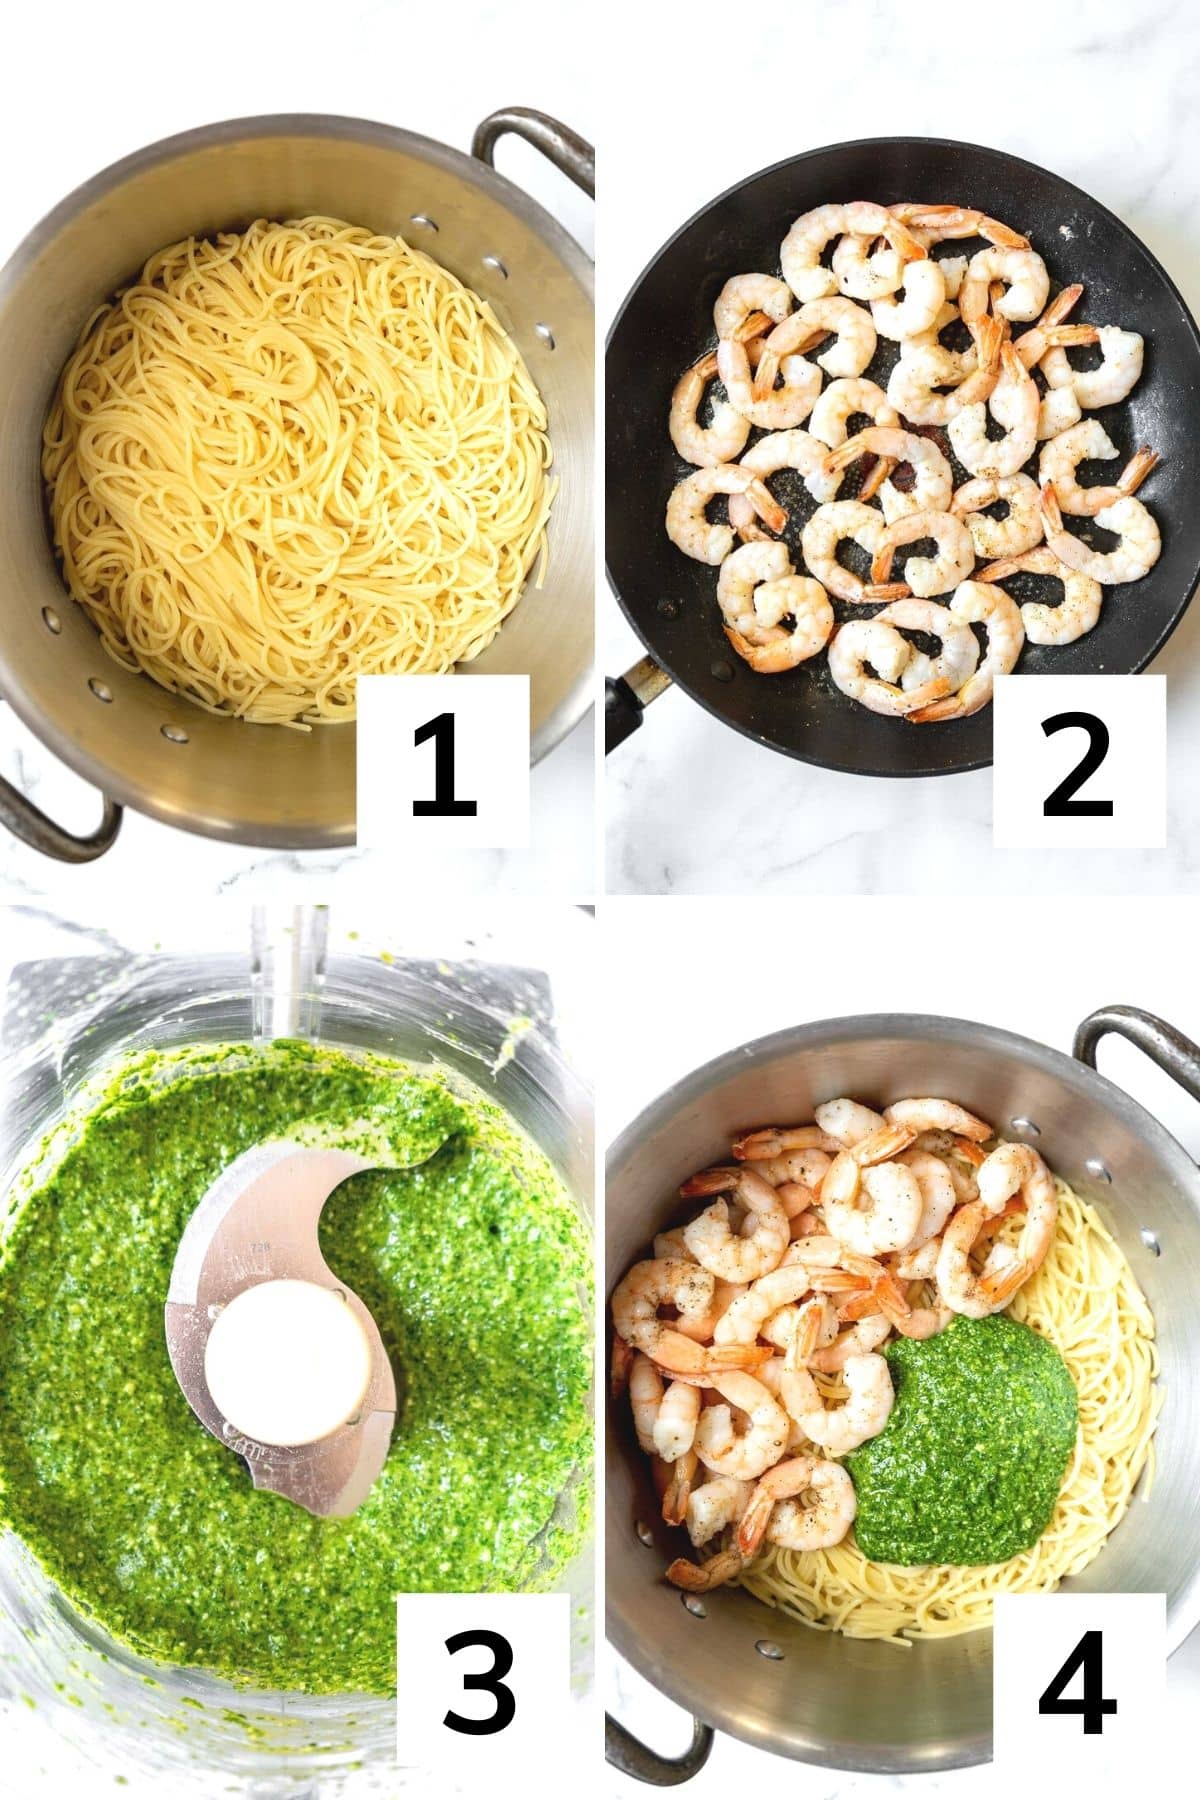 How to make cilantro lime pasta with shrimp step by step